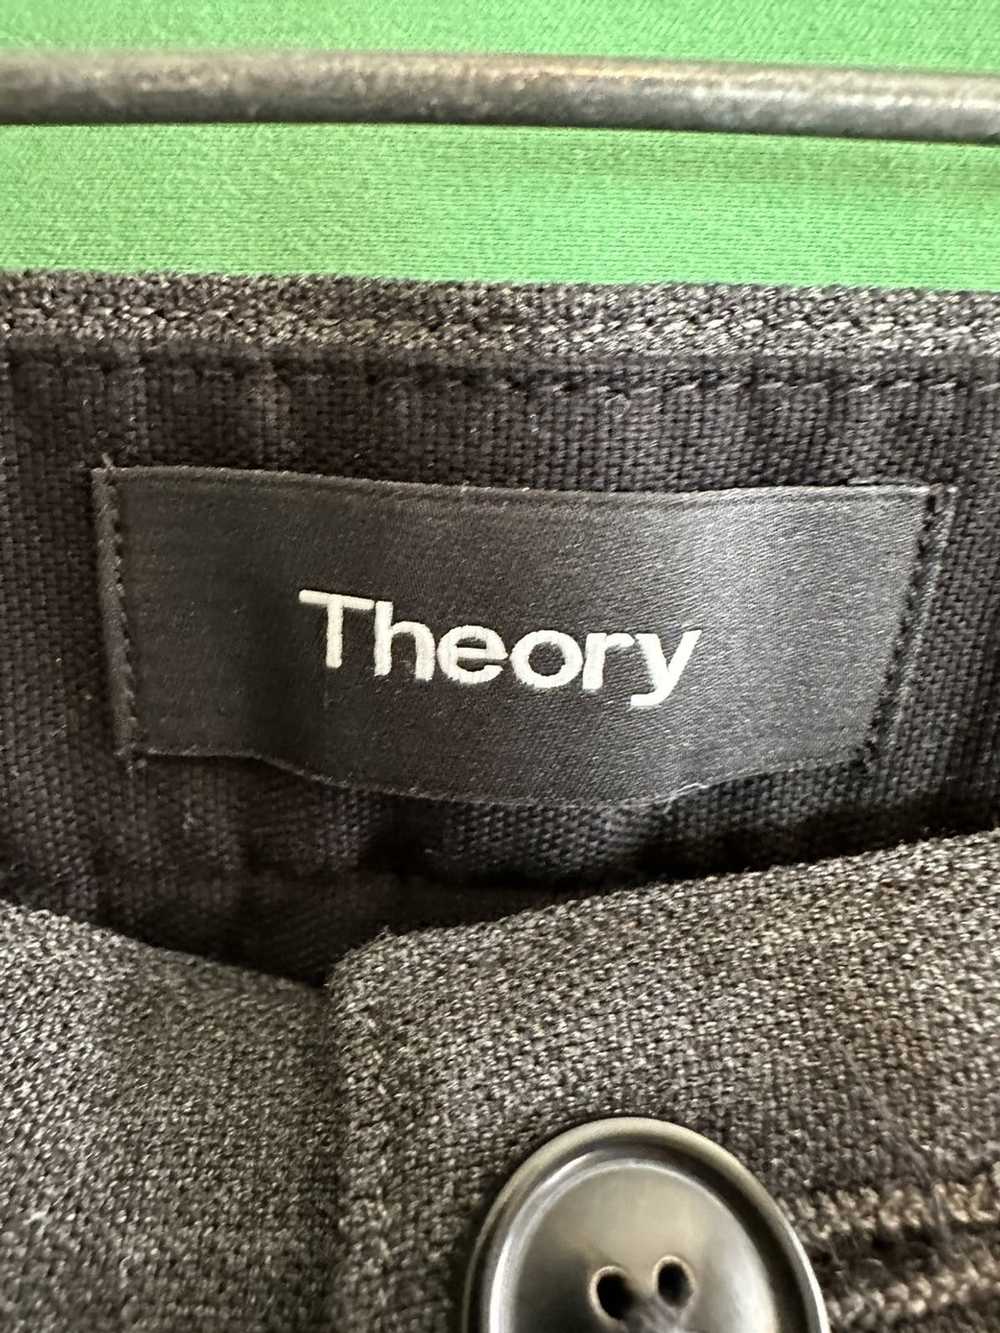 Theory Dark gray flat front pants / trousers - image 7